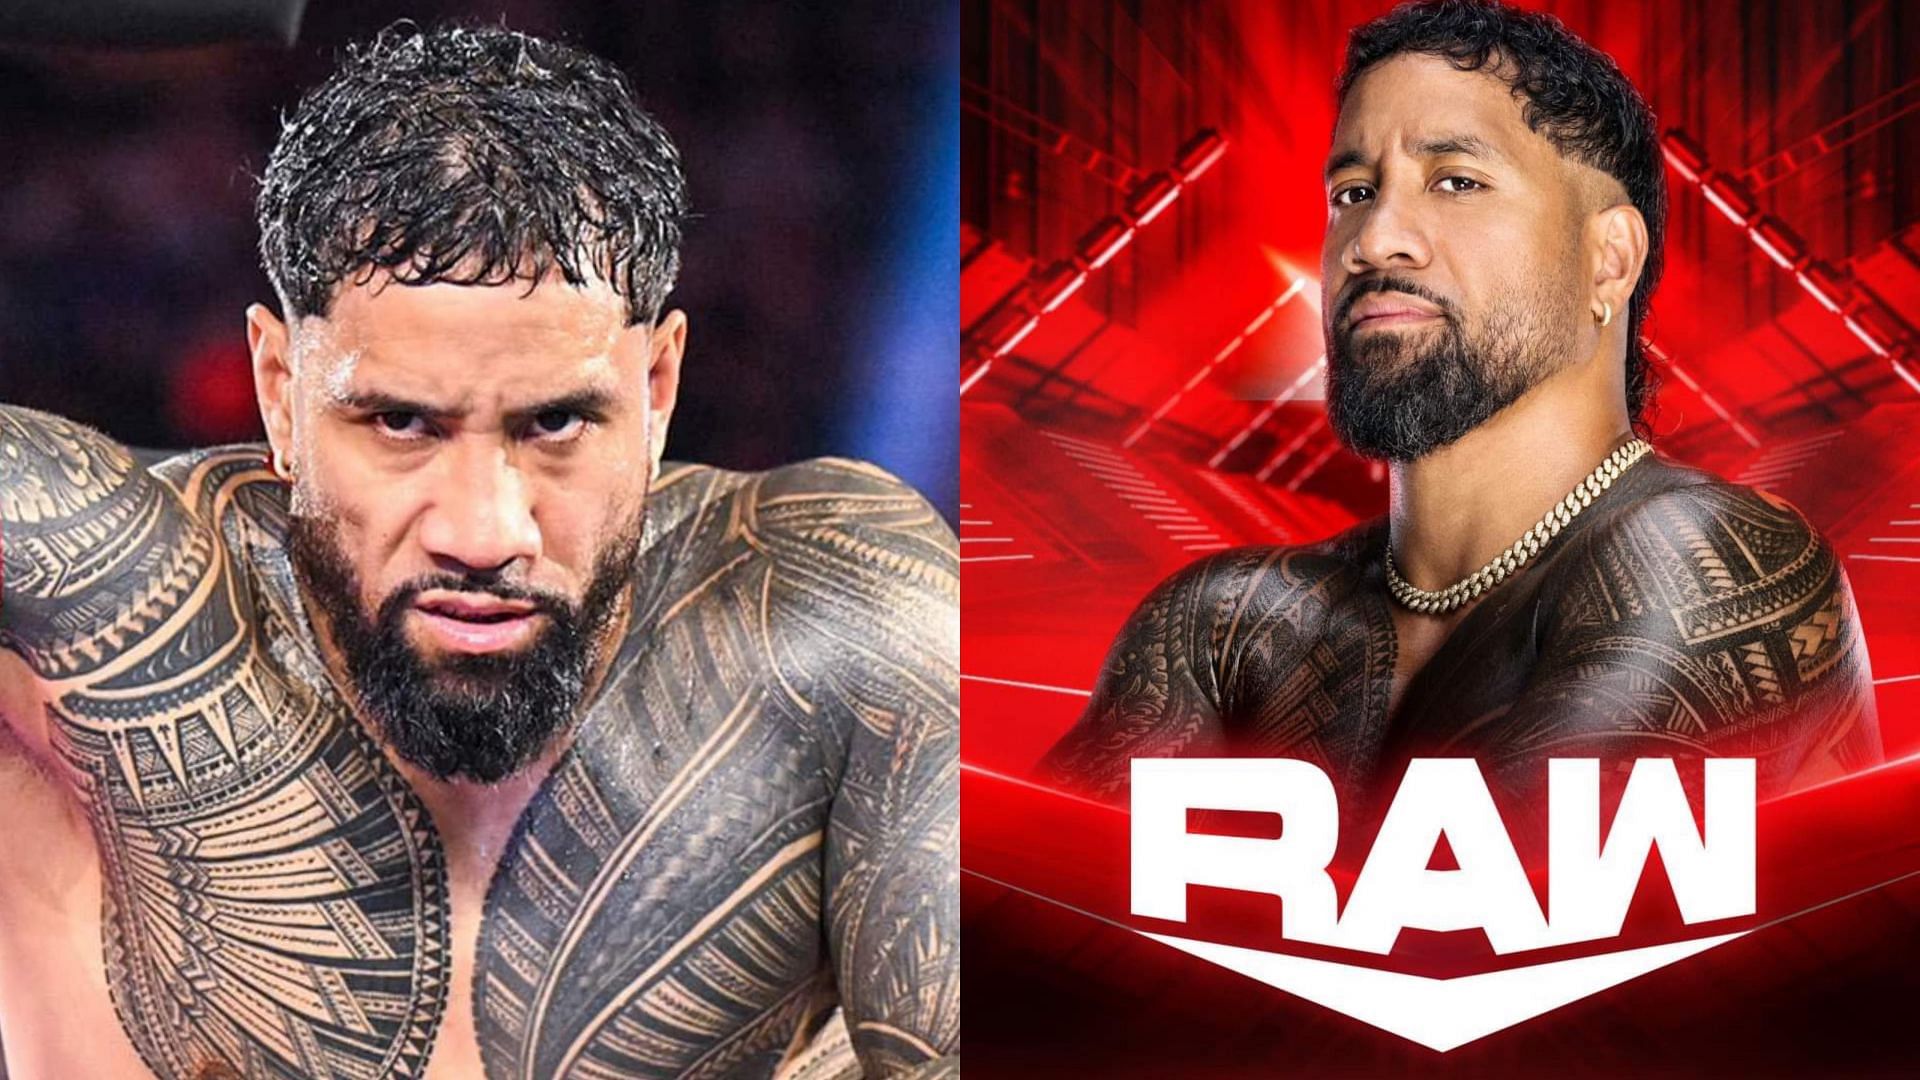 What was your reaction to Jey Uso moving to RAW? 